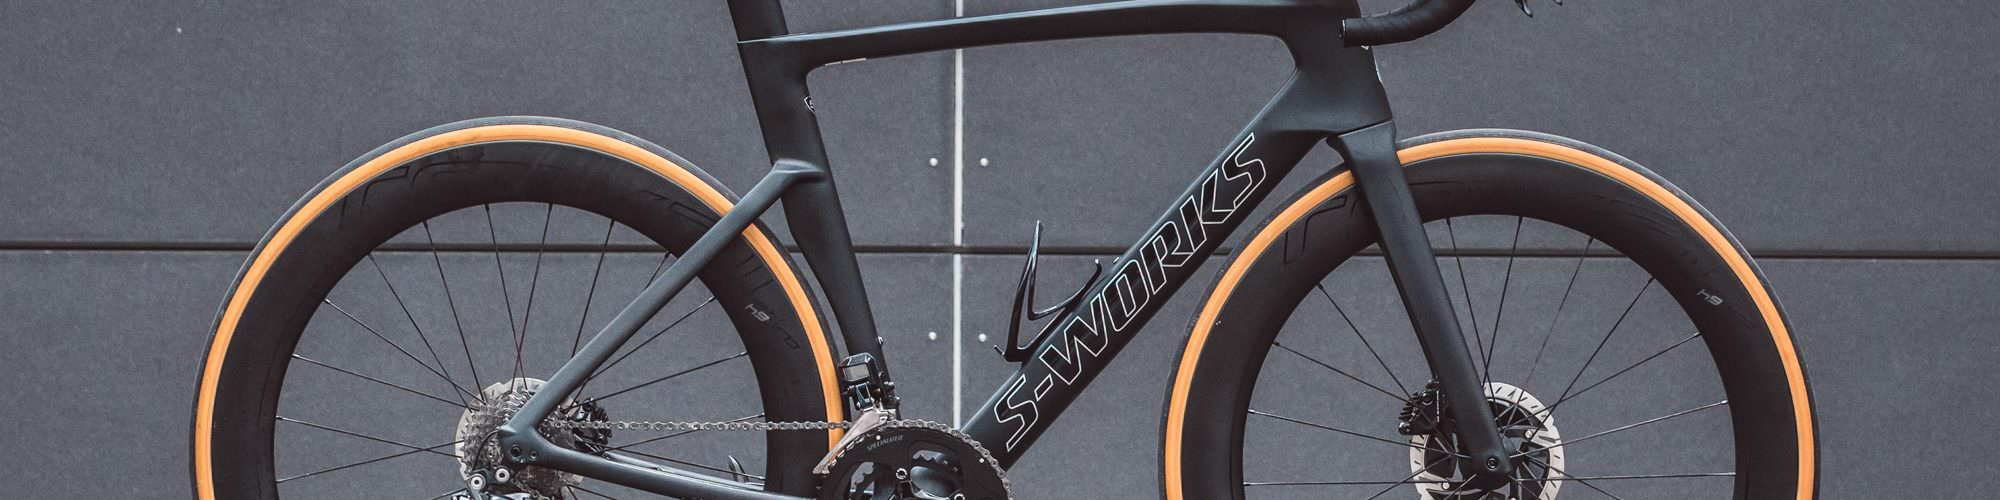 The 2019 Specialized Venge Pro is an S-Works in disguise - BikeRadar